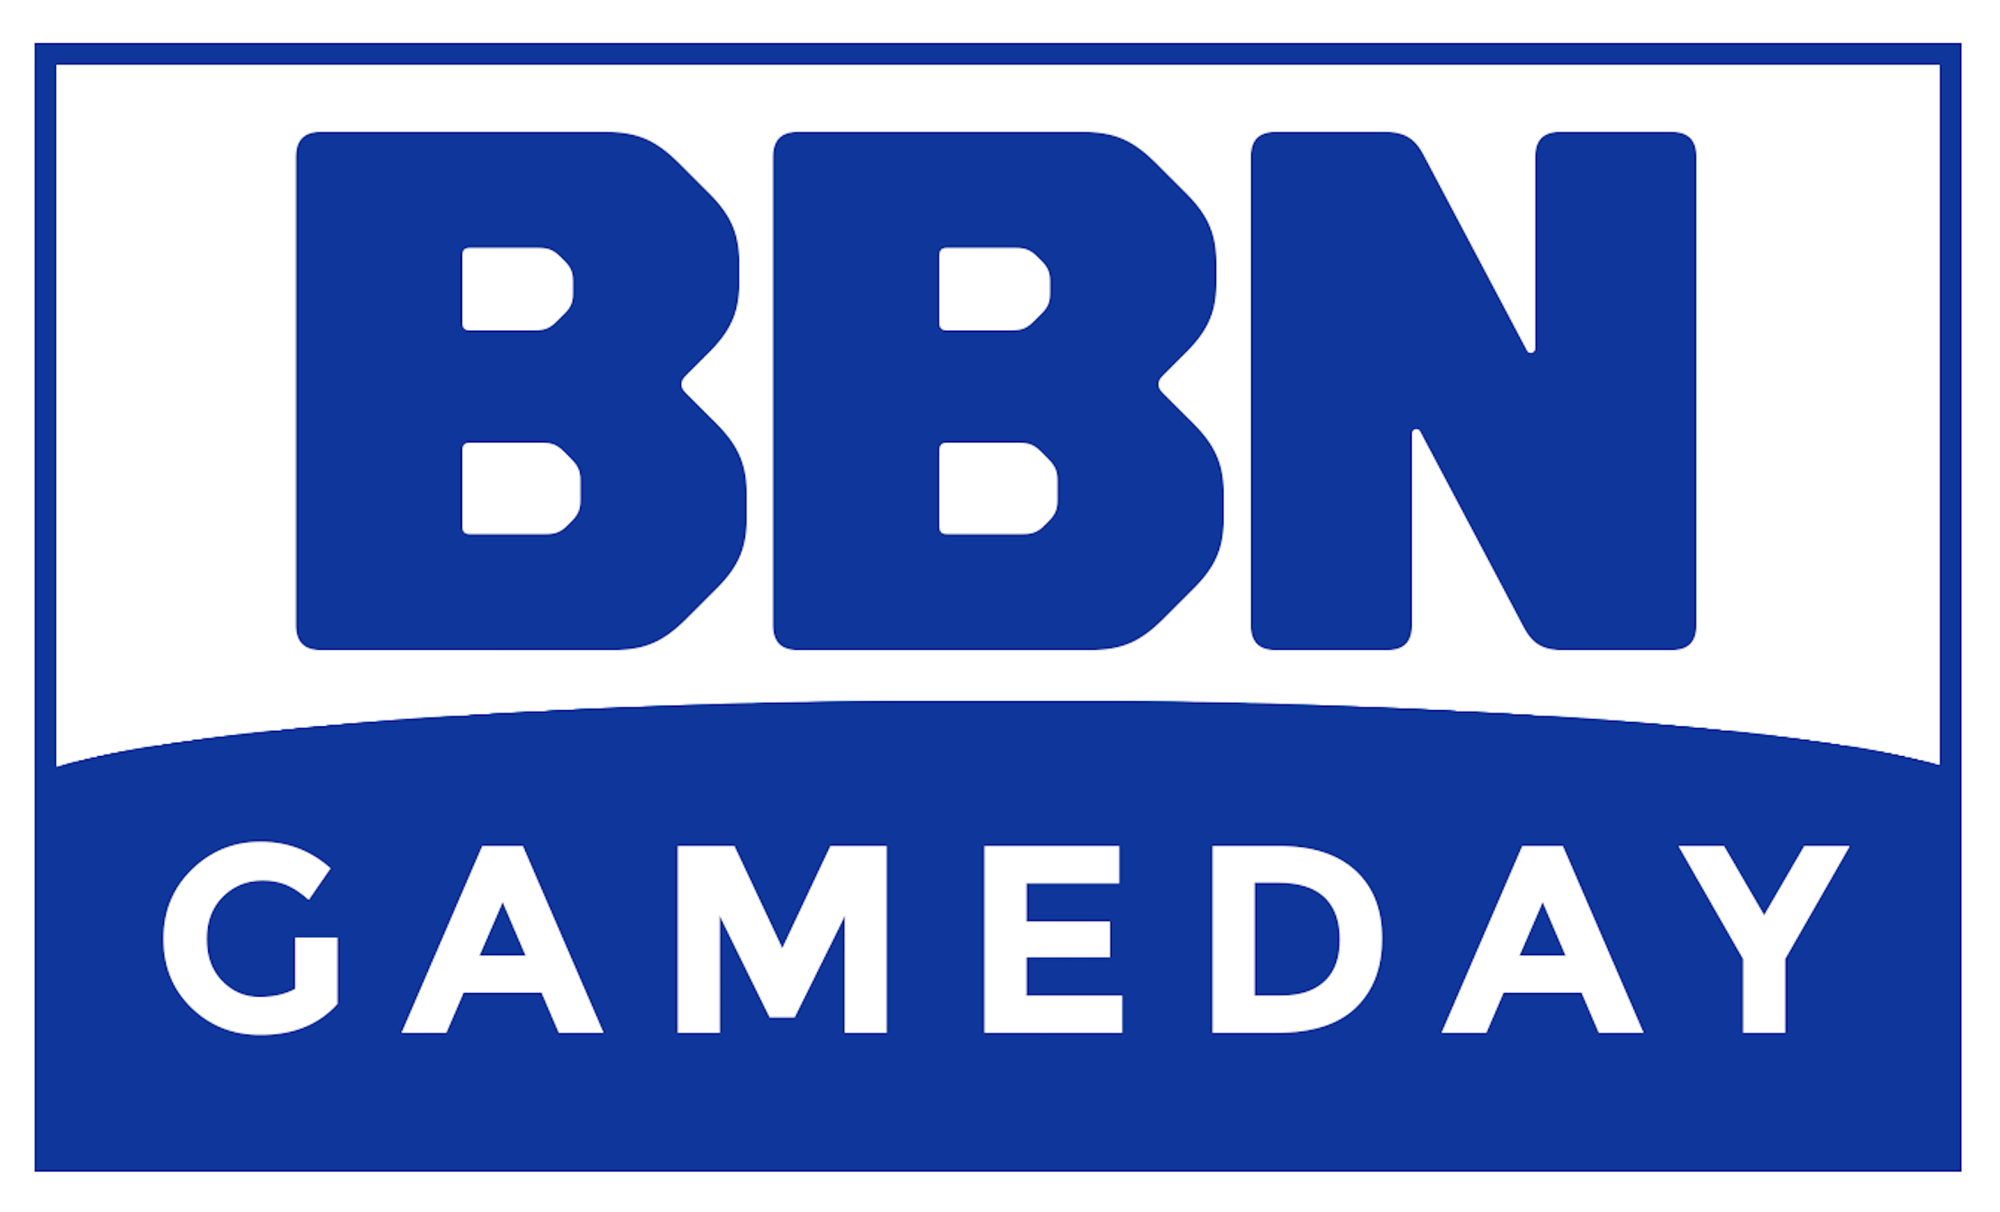 BBN Gameday February 26th 2022